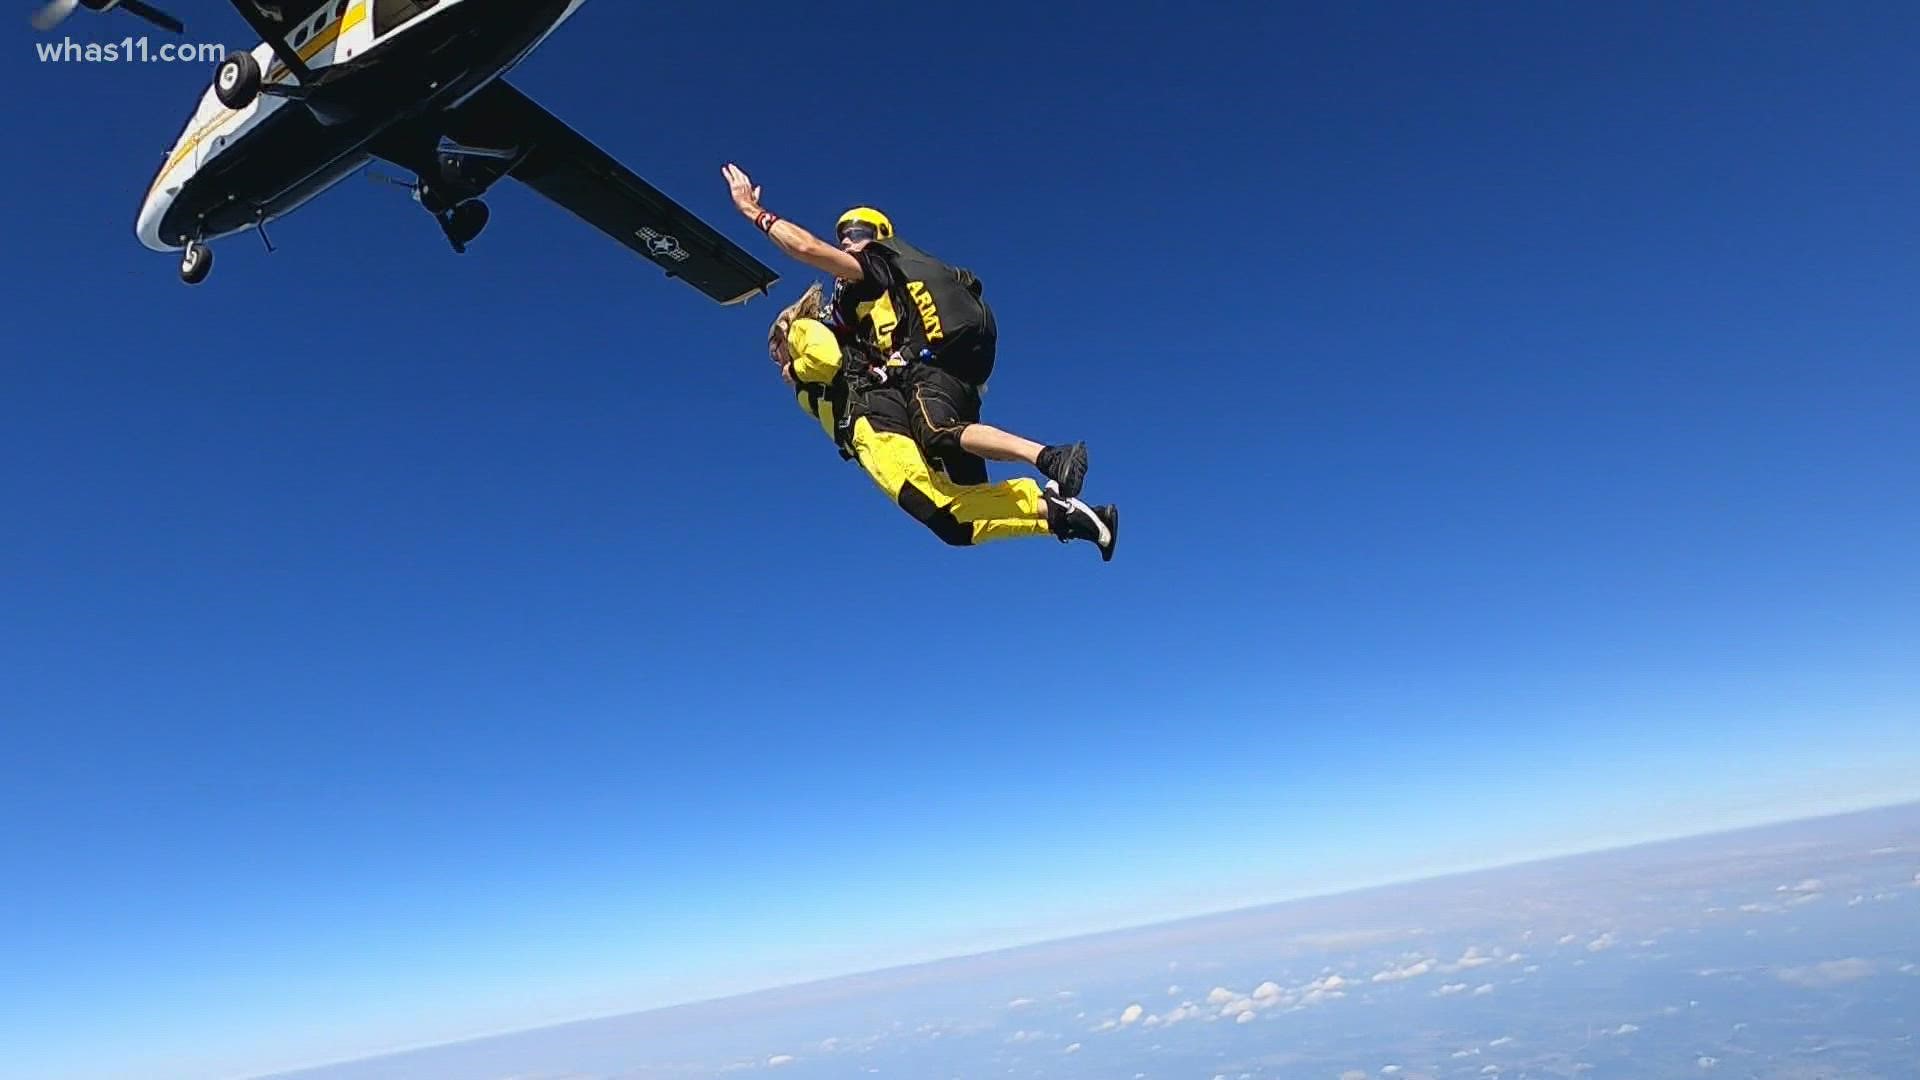 "I just thought it would be a privilege and honor to be able to do this with the best parachute team ever."